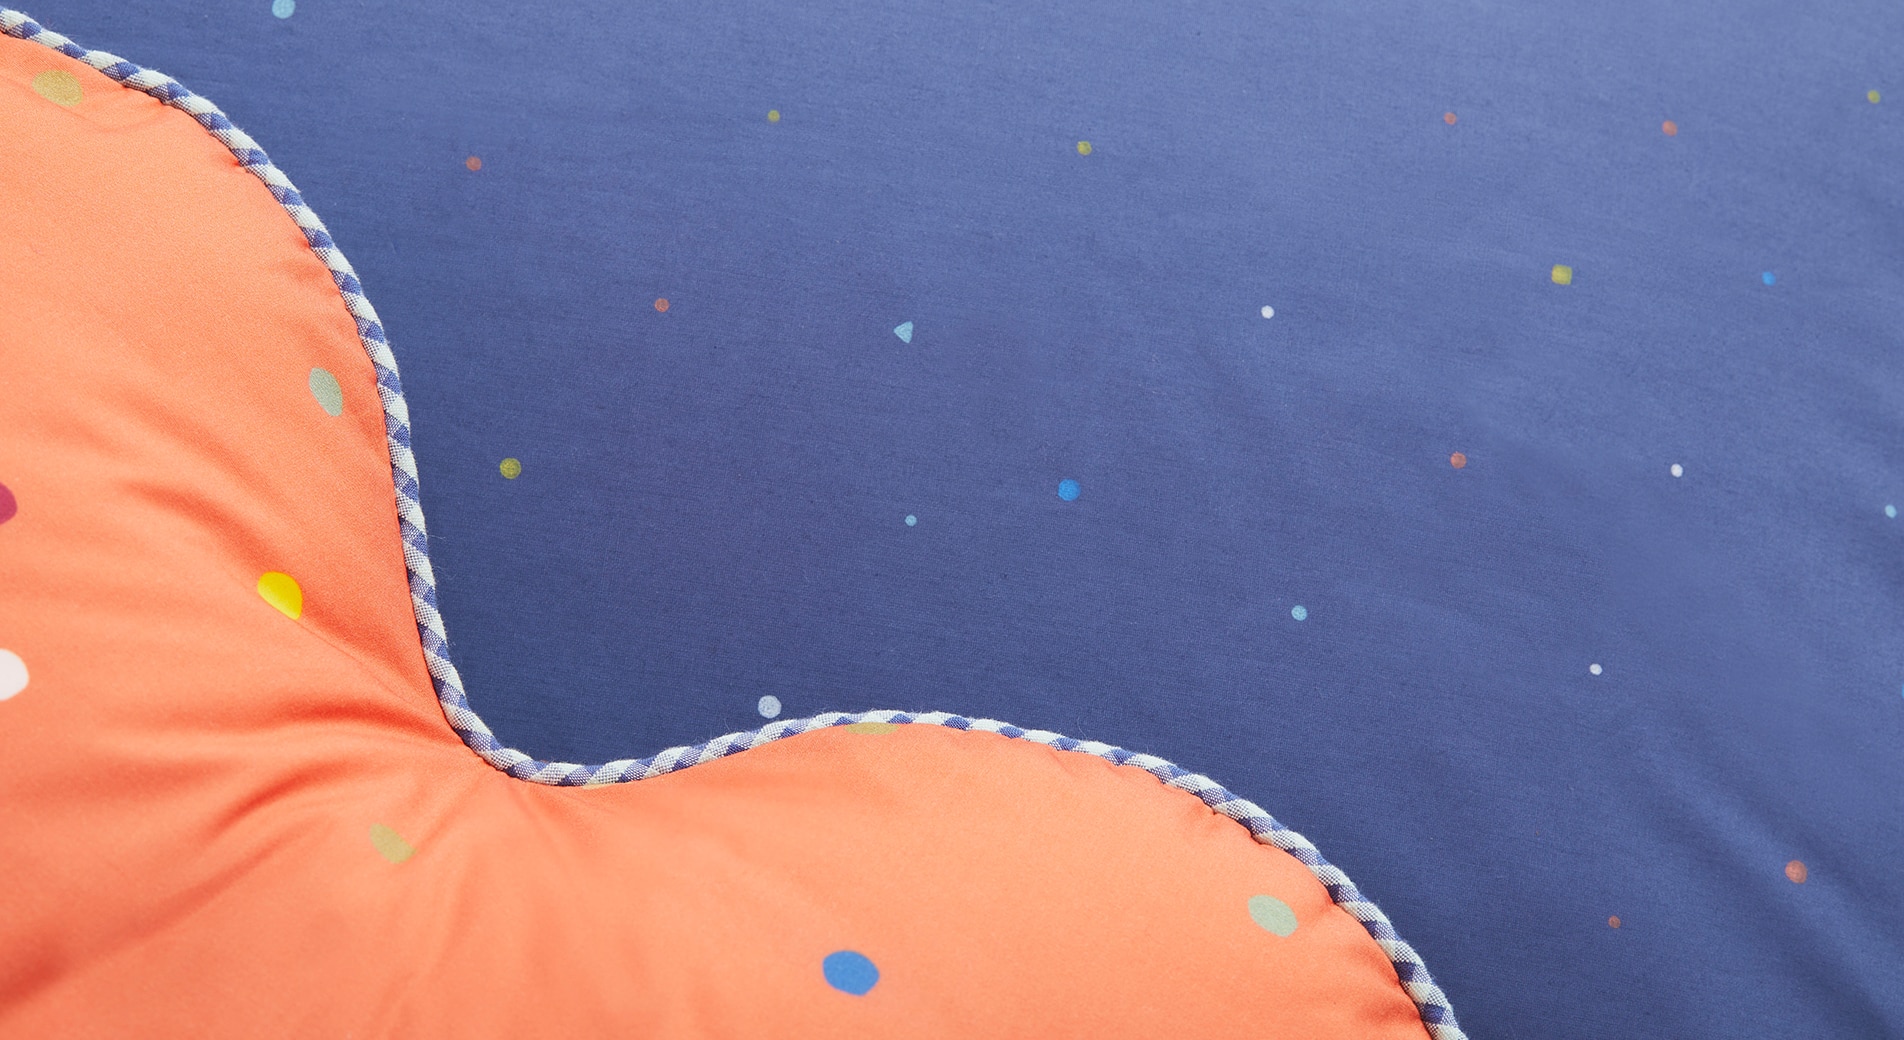 Kids sleep transition. A close up photo of an orange heart-shaped cushion on top of a blue sheet with small hearts printed on it.